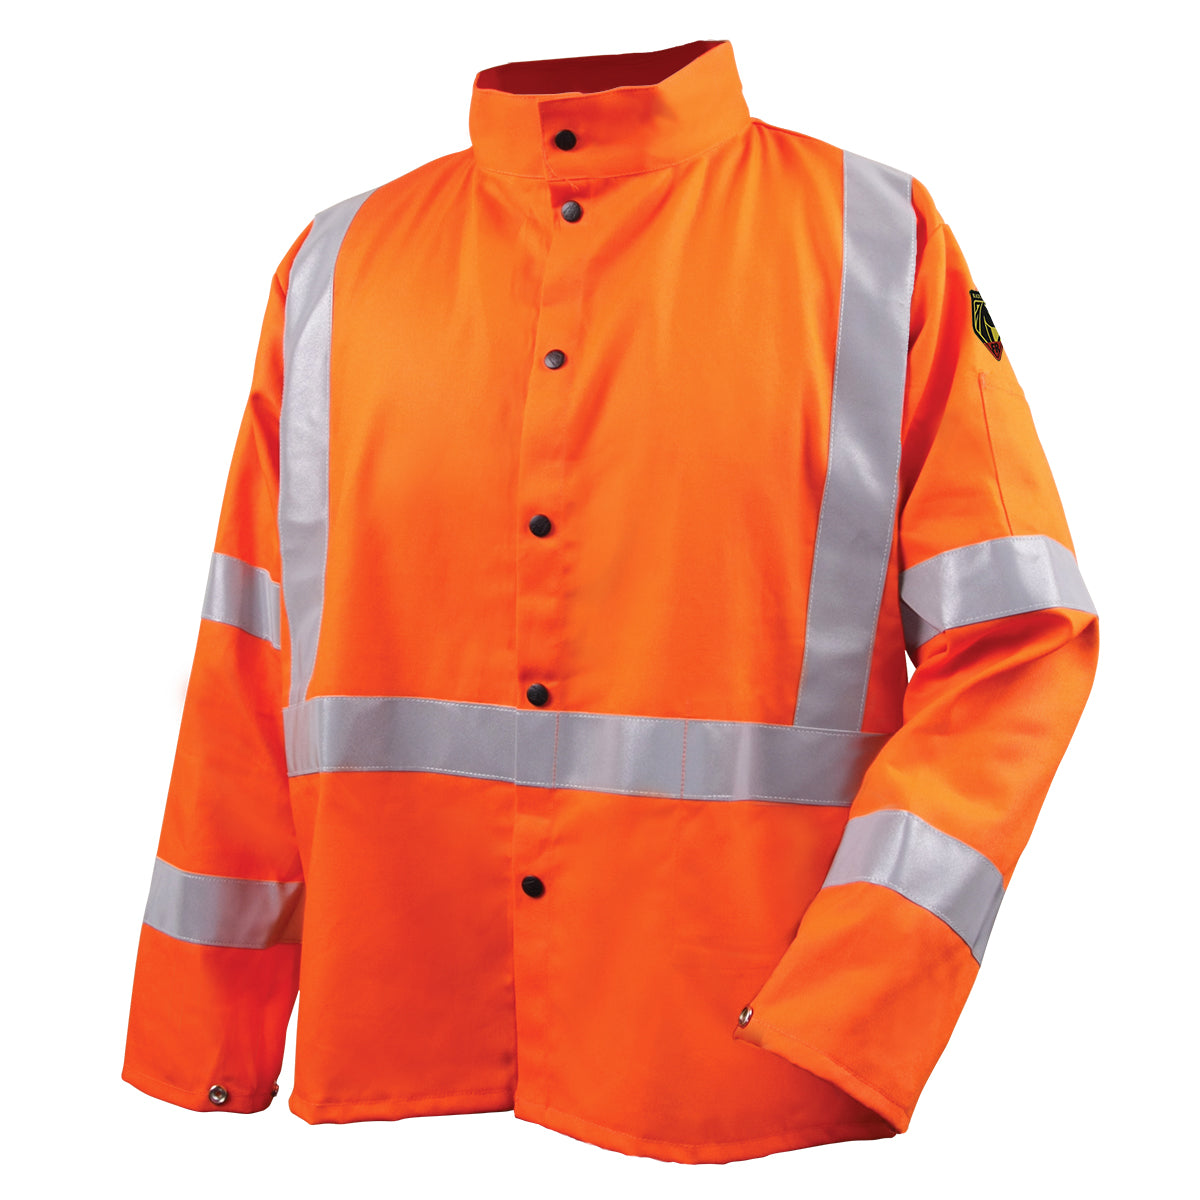 9 Oz Orange Flame Resistant Cotton 30 Inch Jacket With Silver Reflective - JF1012-OR